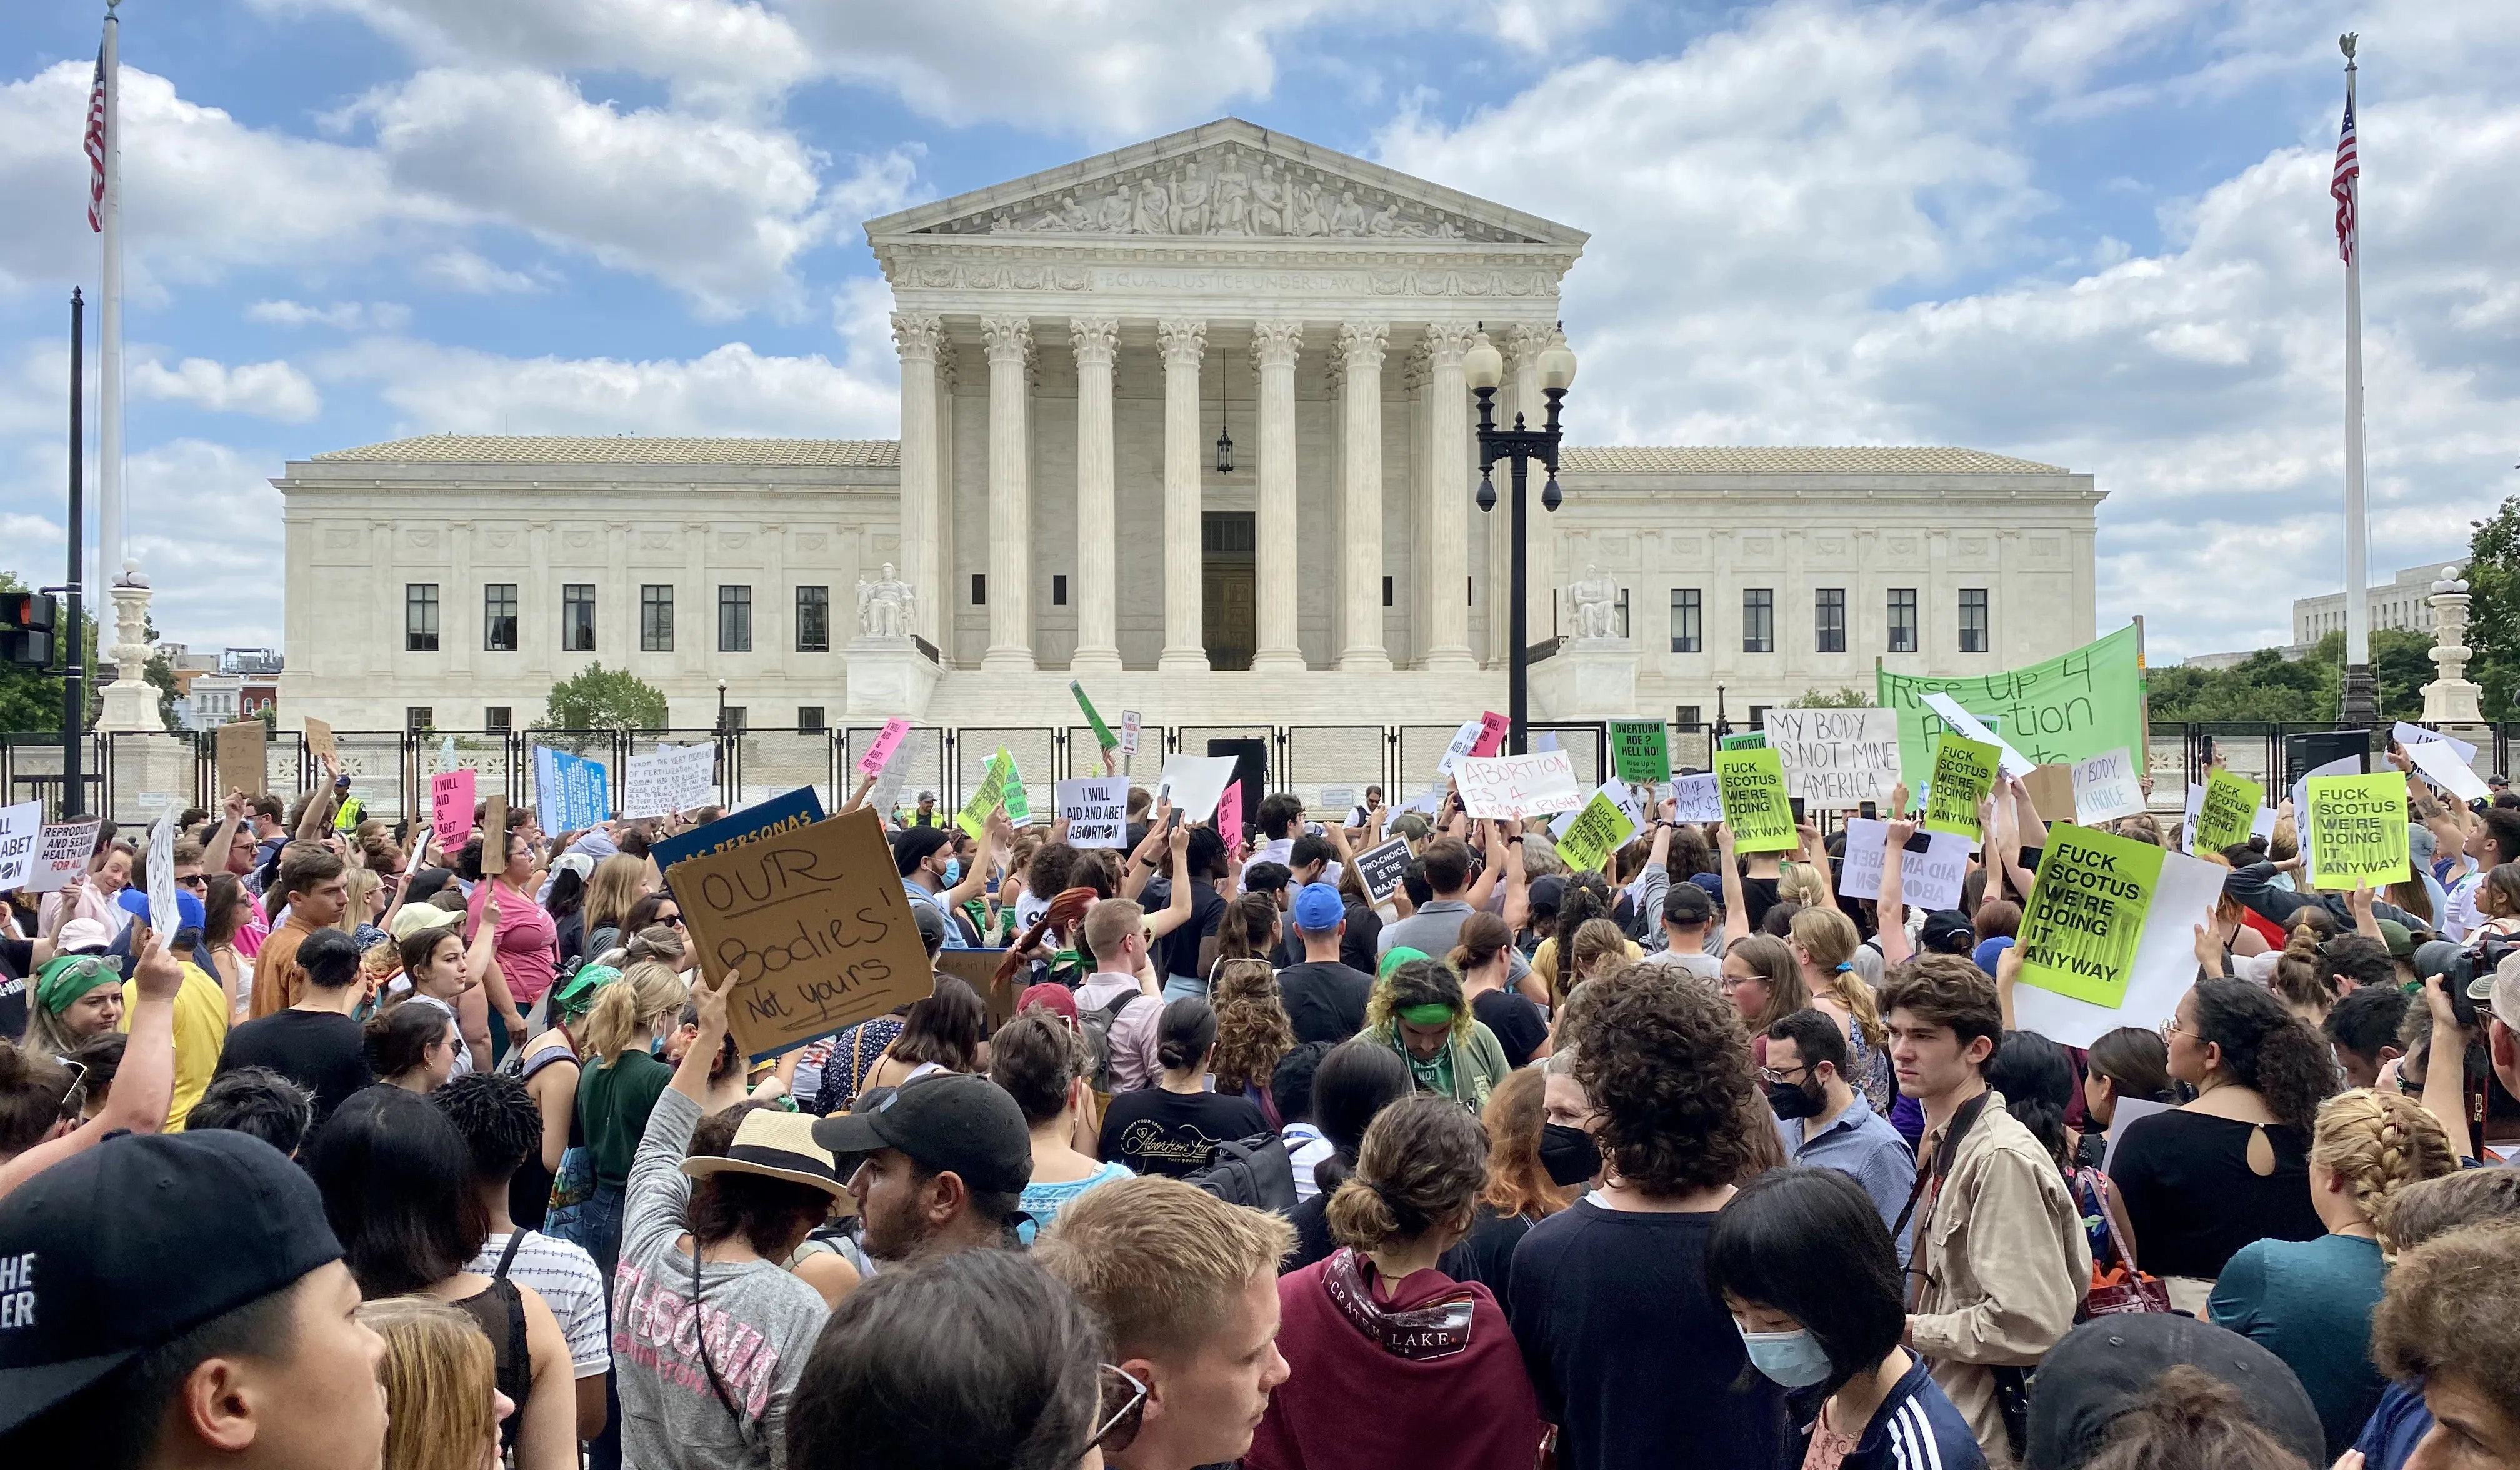 The scene outside the U.S. Supreme Court in Washington, D.C., after the court released its decision in the Dobbs abortion case on June 24, 2022. Pro-abortion demonstrators gradually made up a decided majority of the crowd as the day wore on.?w=200&h=150